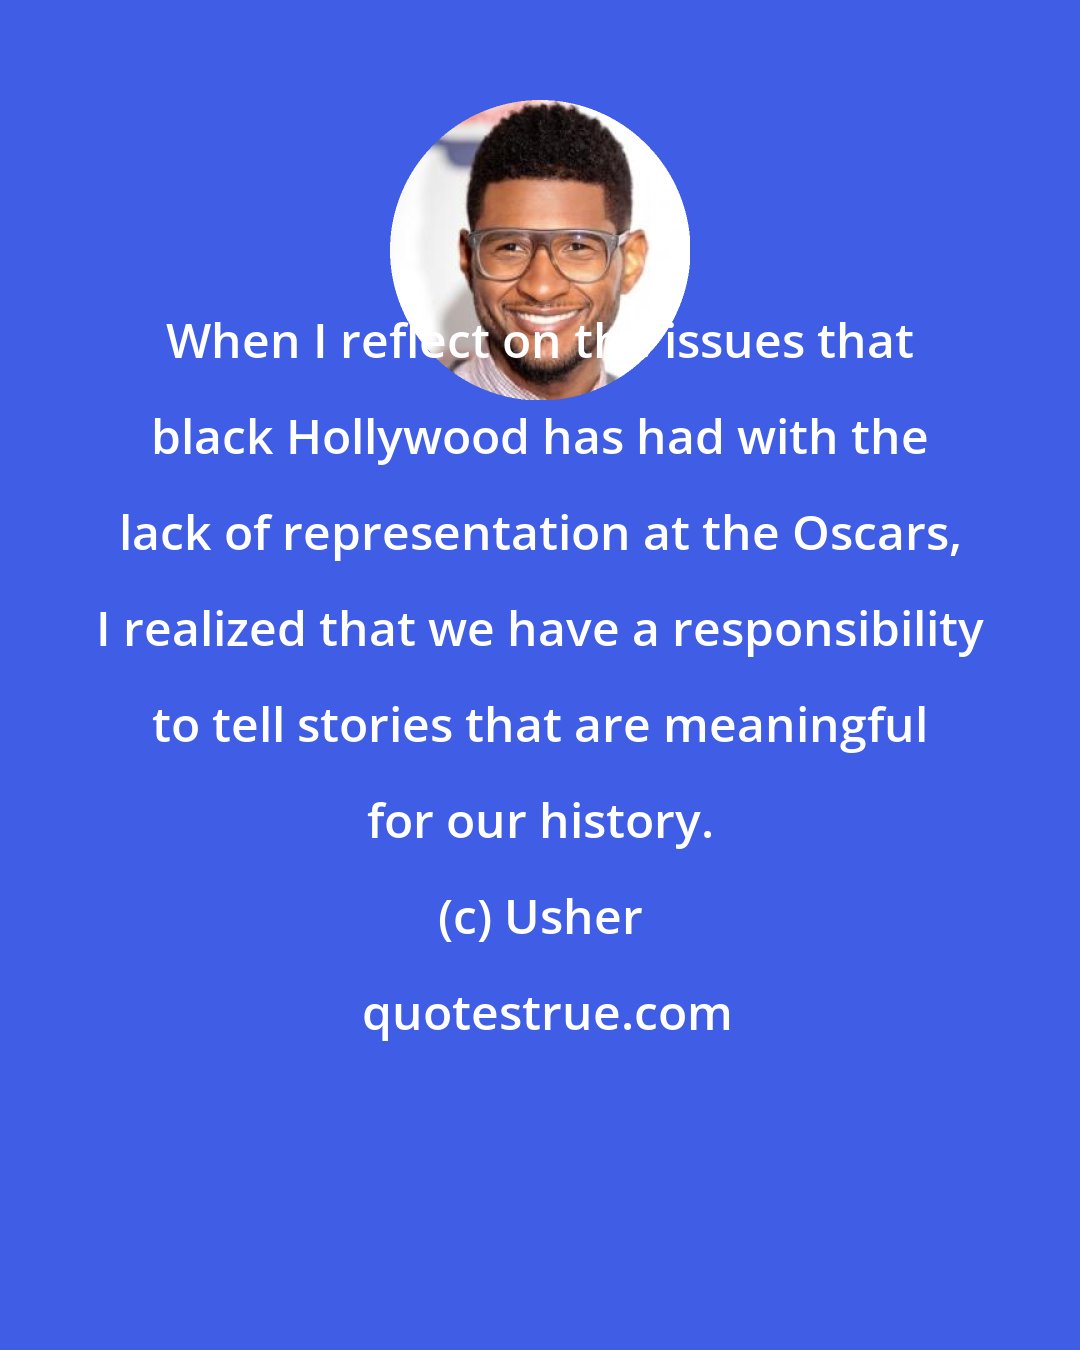 Usher: When I reflect on the issues that black Hollywood has had with the lack of representation at the Oscars, I realized that we have a responsibility to tell stories that are meaningful for our history.